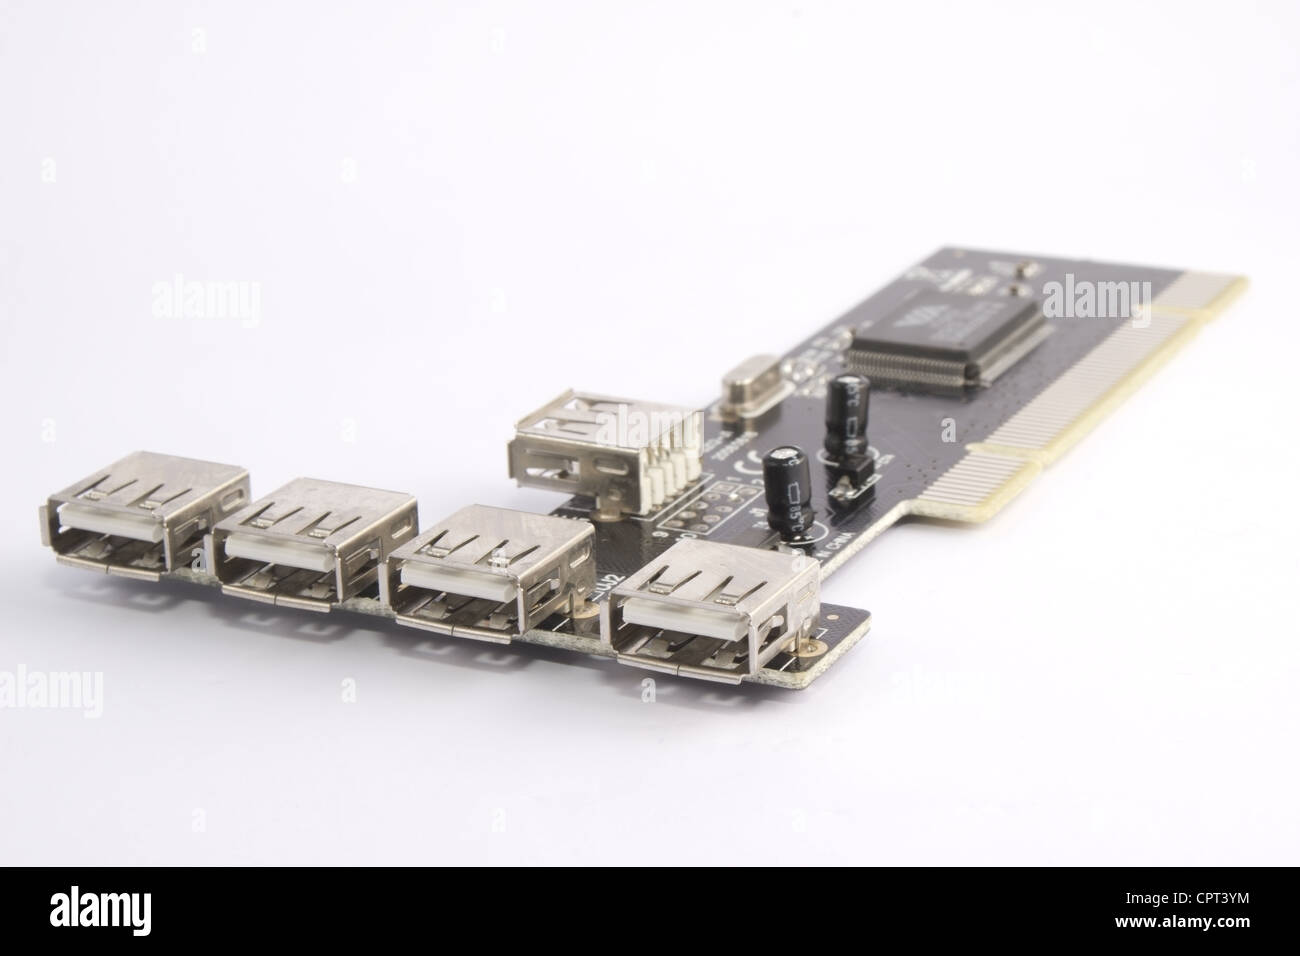 Usb 2 pci expansion card for a computer Stock Photo